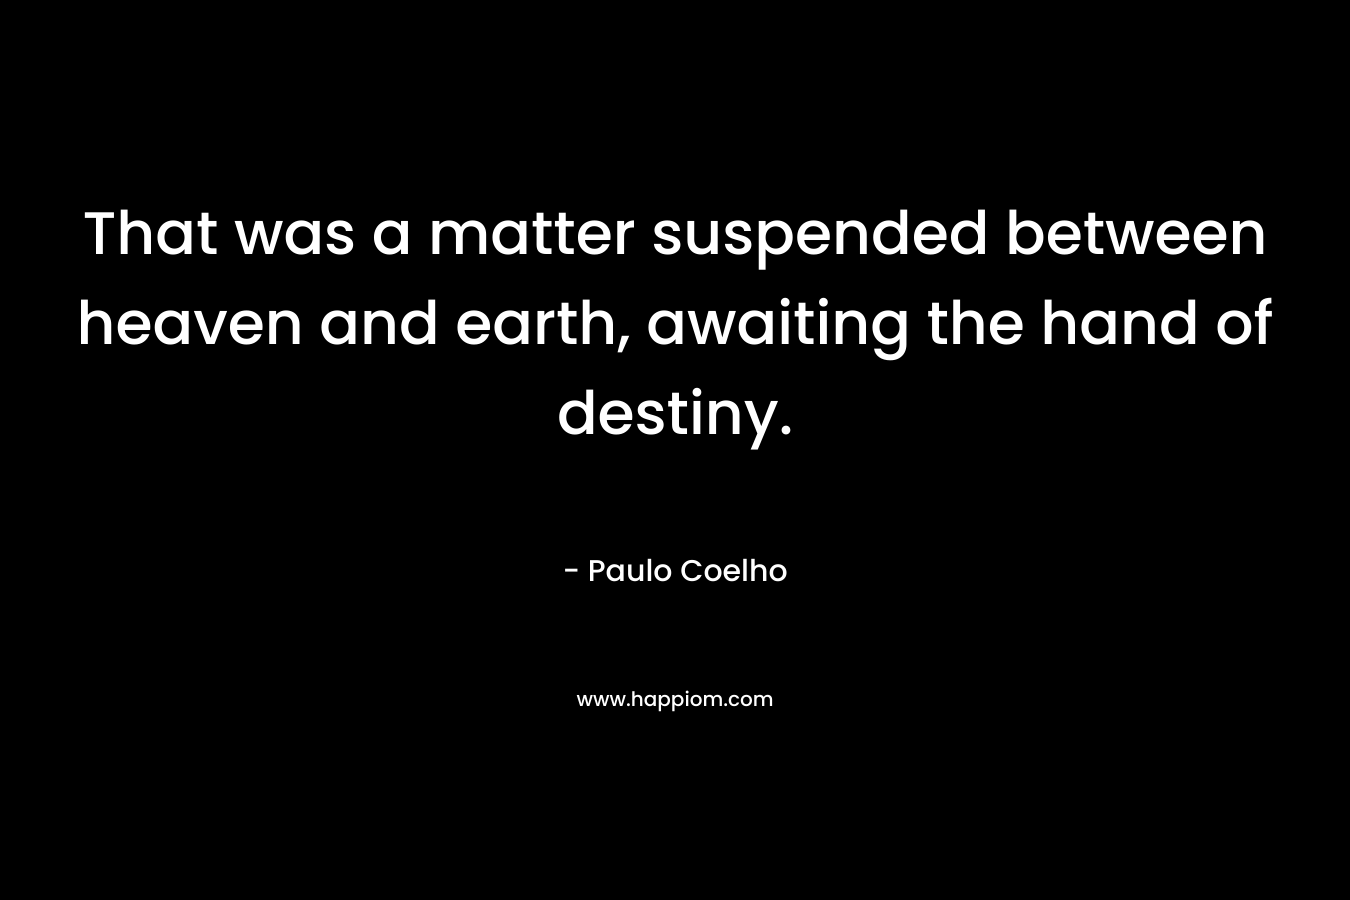 That was a matter suspended between heaven and earth, awaiting the hand of destiny.